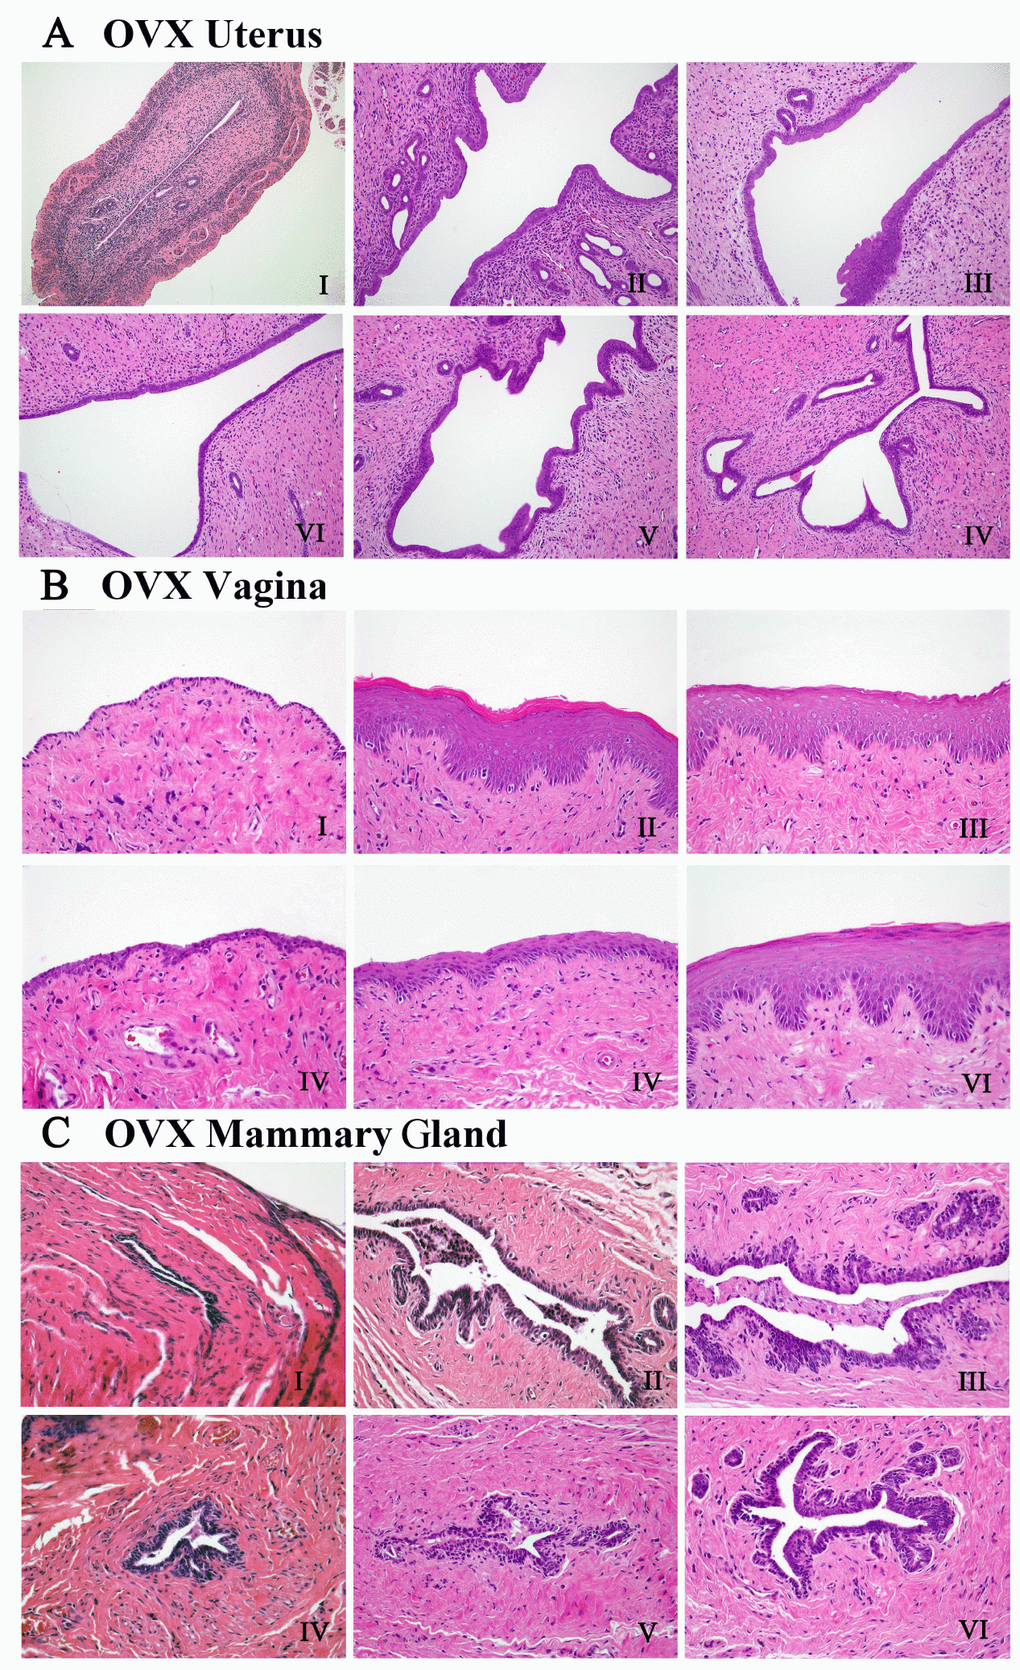 The effects of QYFE treatment on the histology of uterus, vagina and mammary gland in the OVX rats. Representative photomicrographs taken at 200-X magnification of uterine, 400-X magnification of vaginal and mammary gland sections in ovariectomized (OVX) rats. (A–C) are the histology of the uterus, vagina and mammary gland, respectively in OVX rats. The treatment groups in OVX rats are shown: (I) Untreated ovariectomized (OVX) rat; (II) sham-operated rat; (III) OVX rat treated with estradiol valerate (EV); and OVX rat treated with (IV) 0.7 g/kg, (V) 1.4 g/kg, and (VI) 2.8 g/kg QYFE.